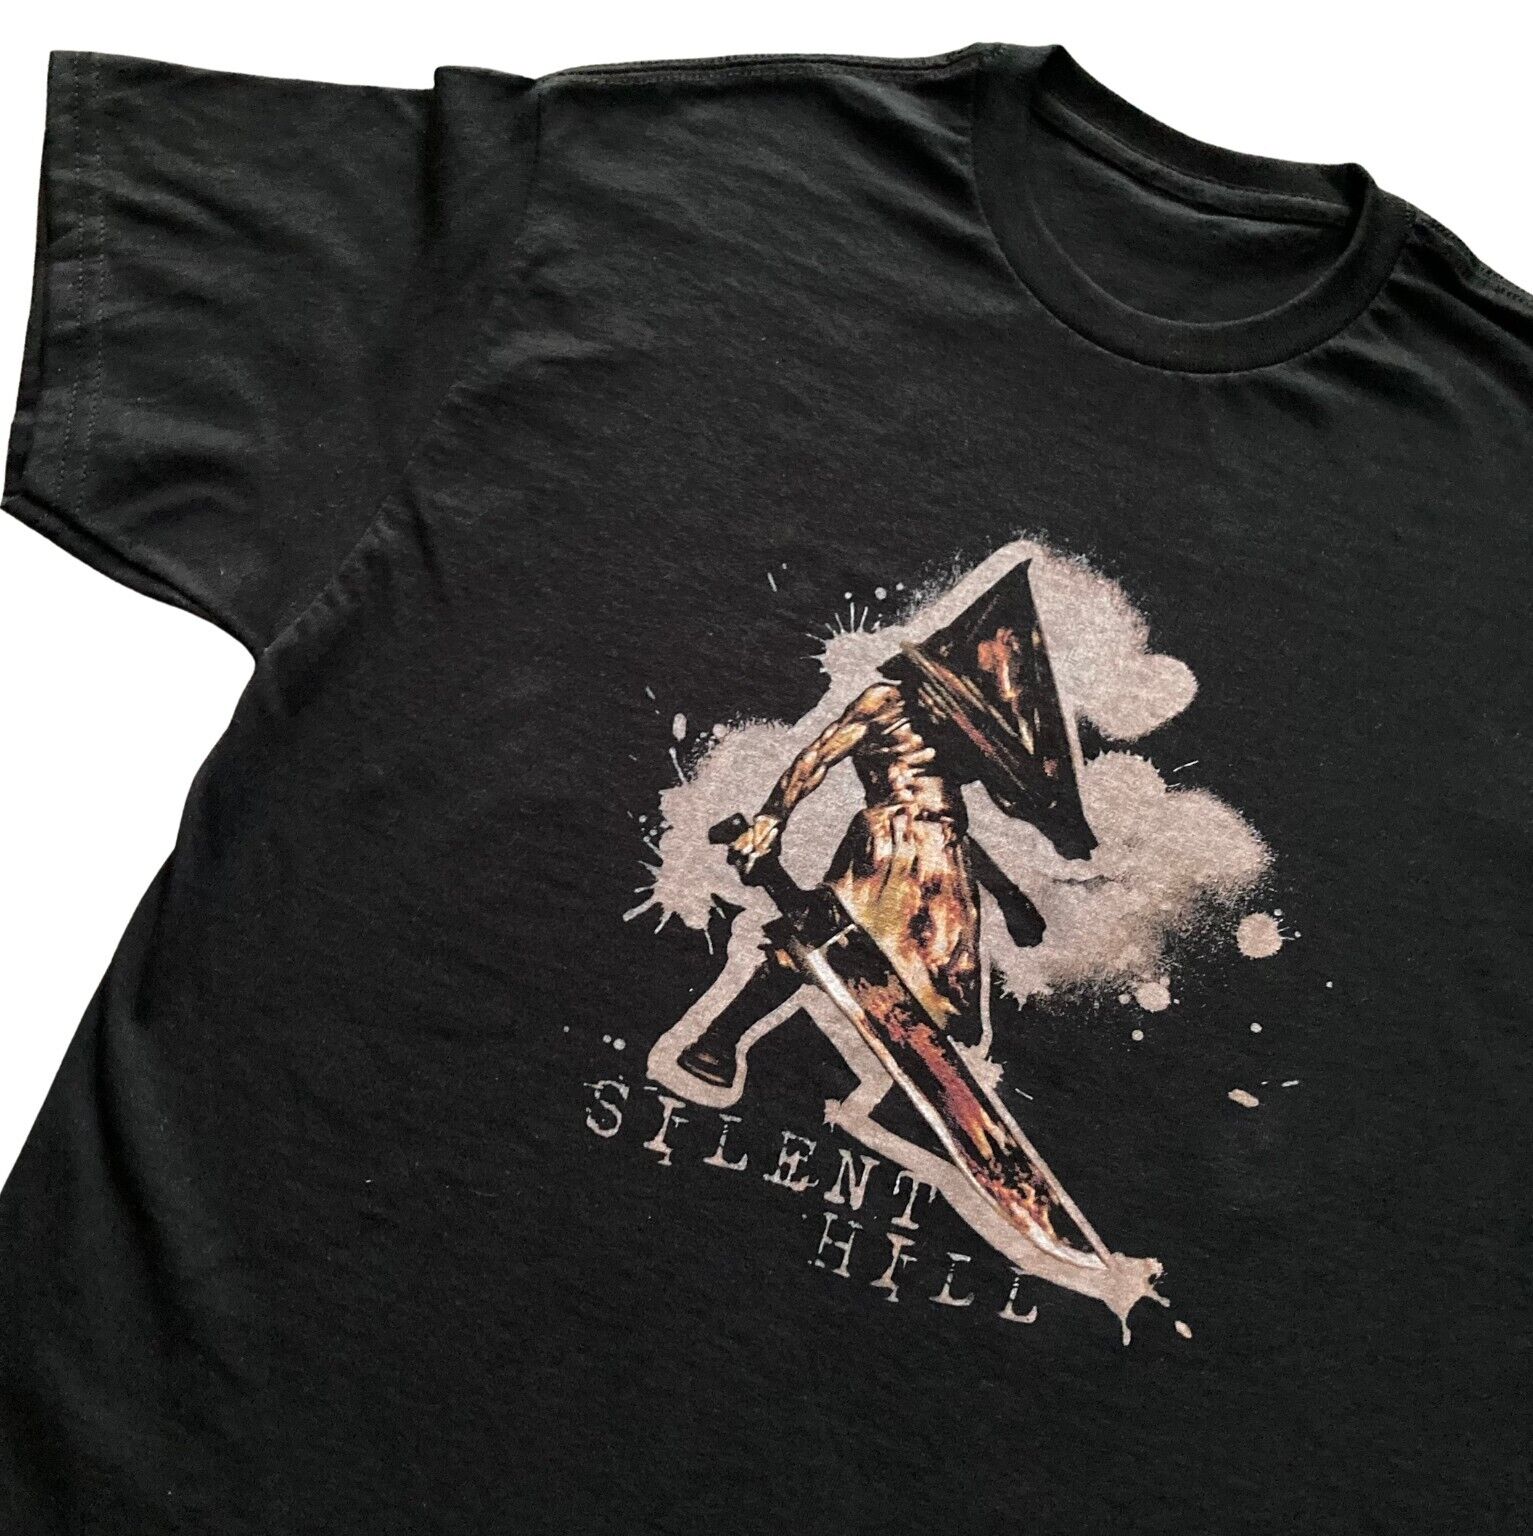 Silent Hill 2 Classic Gildan Shirt, Occult, Cult, and Obscure Clothing and  Tshirts